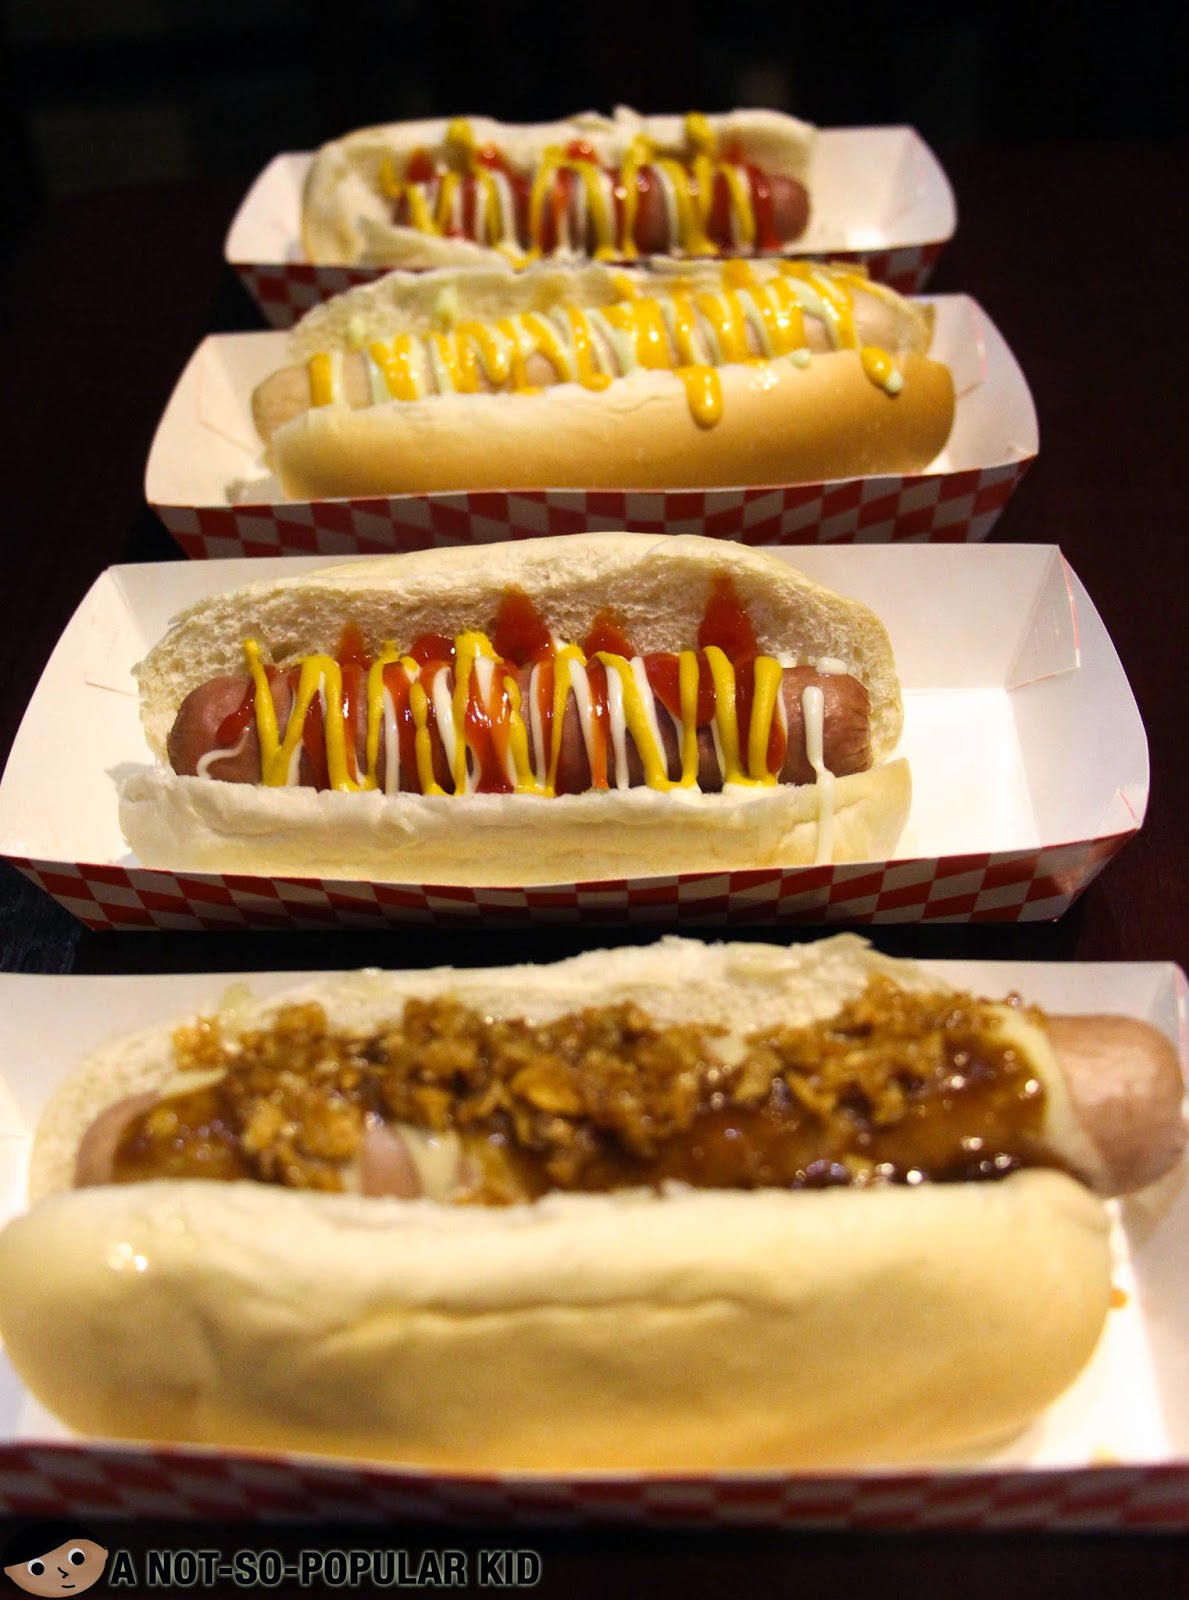 The four hotdog/franks variants available in Franks Craft Beers